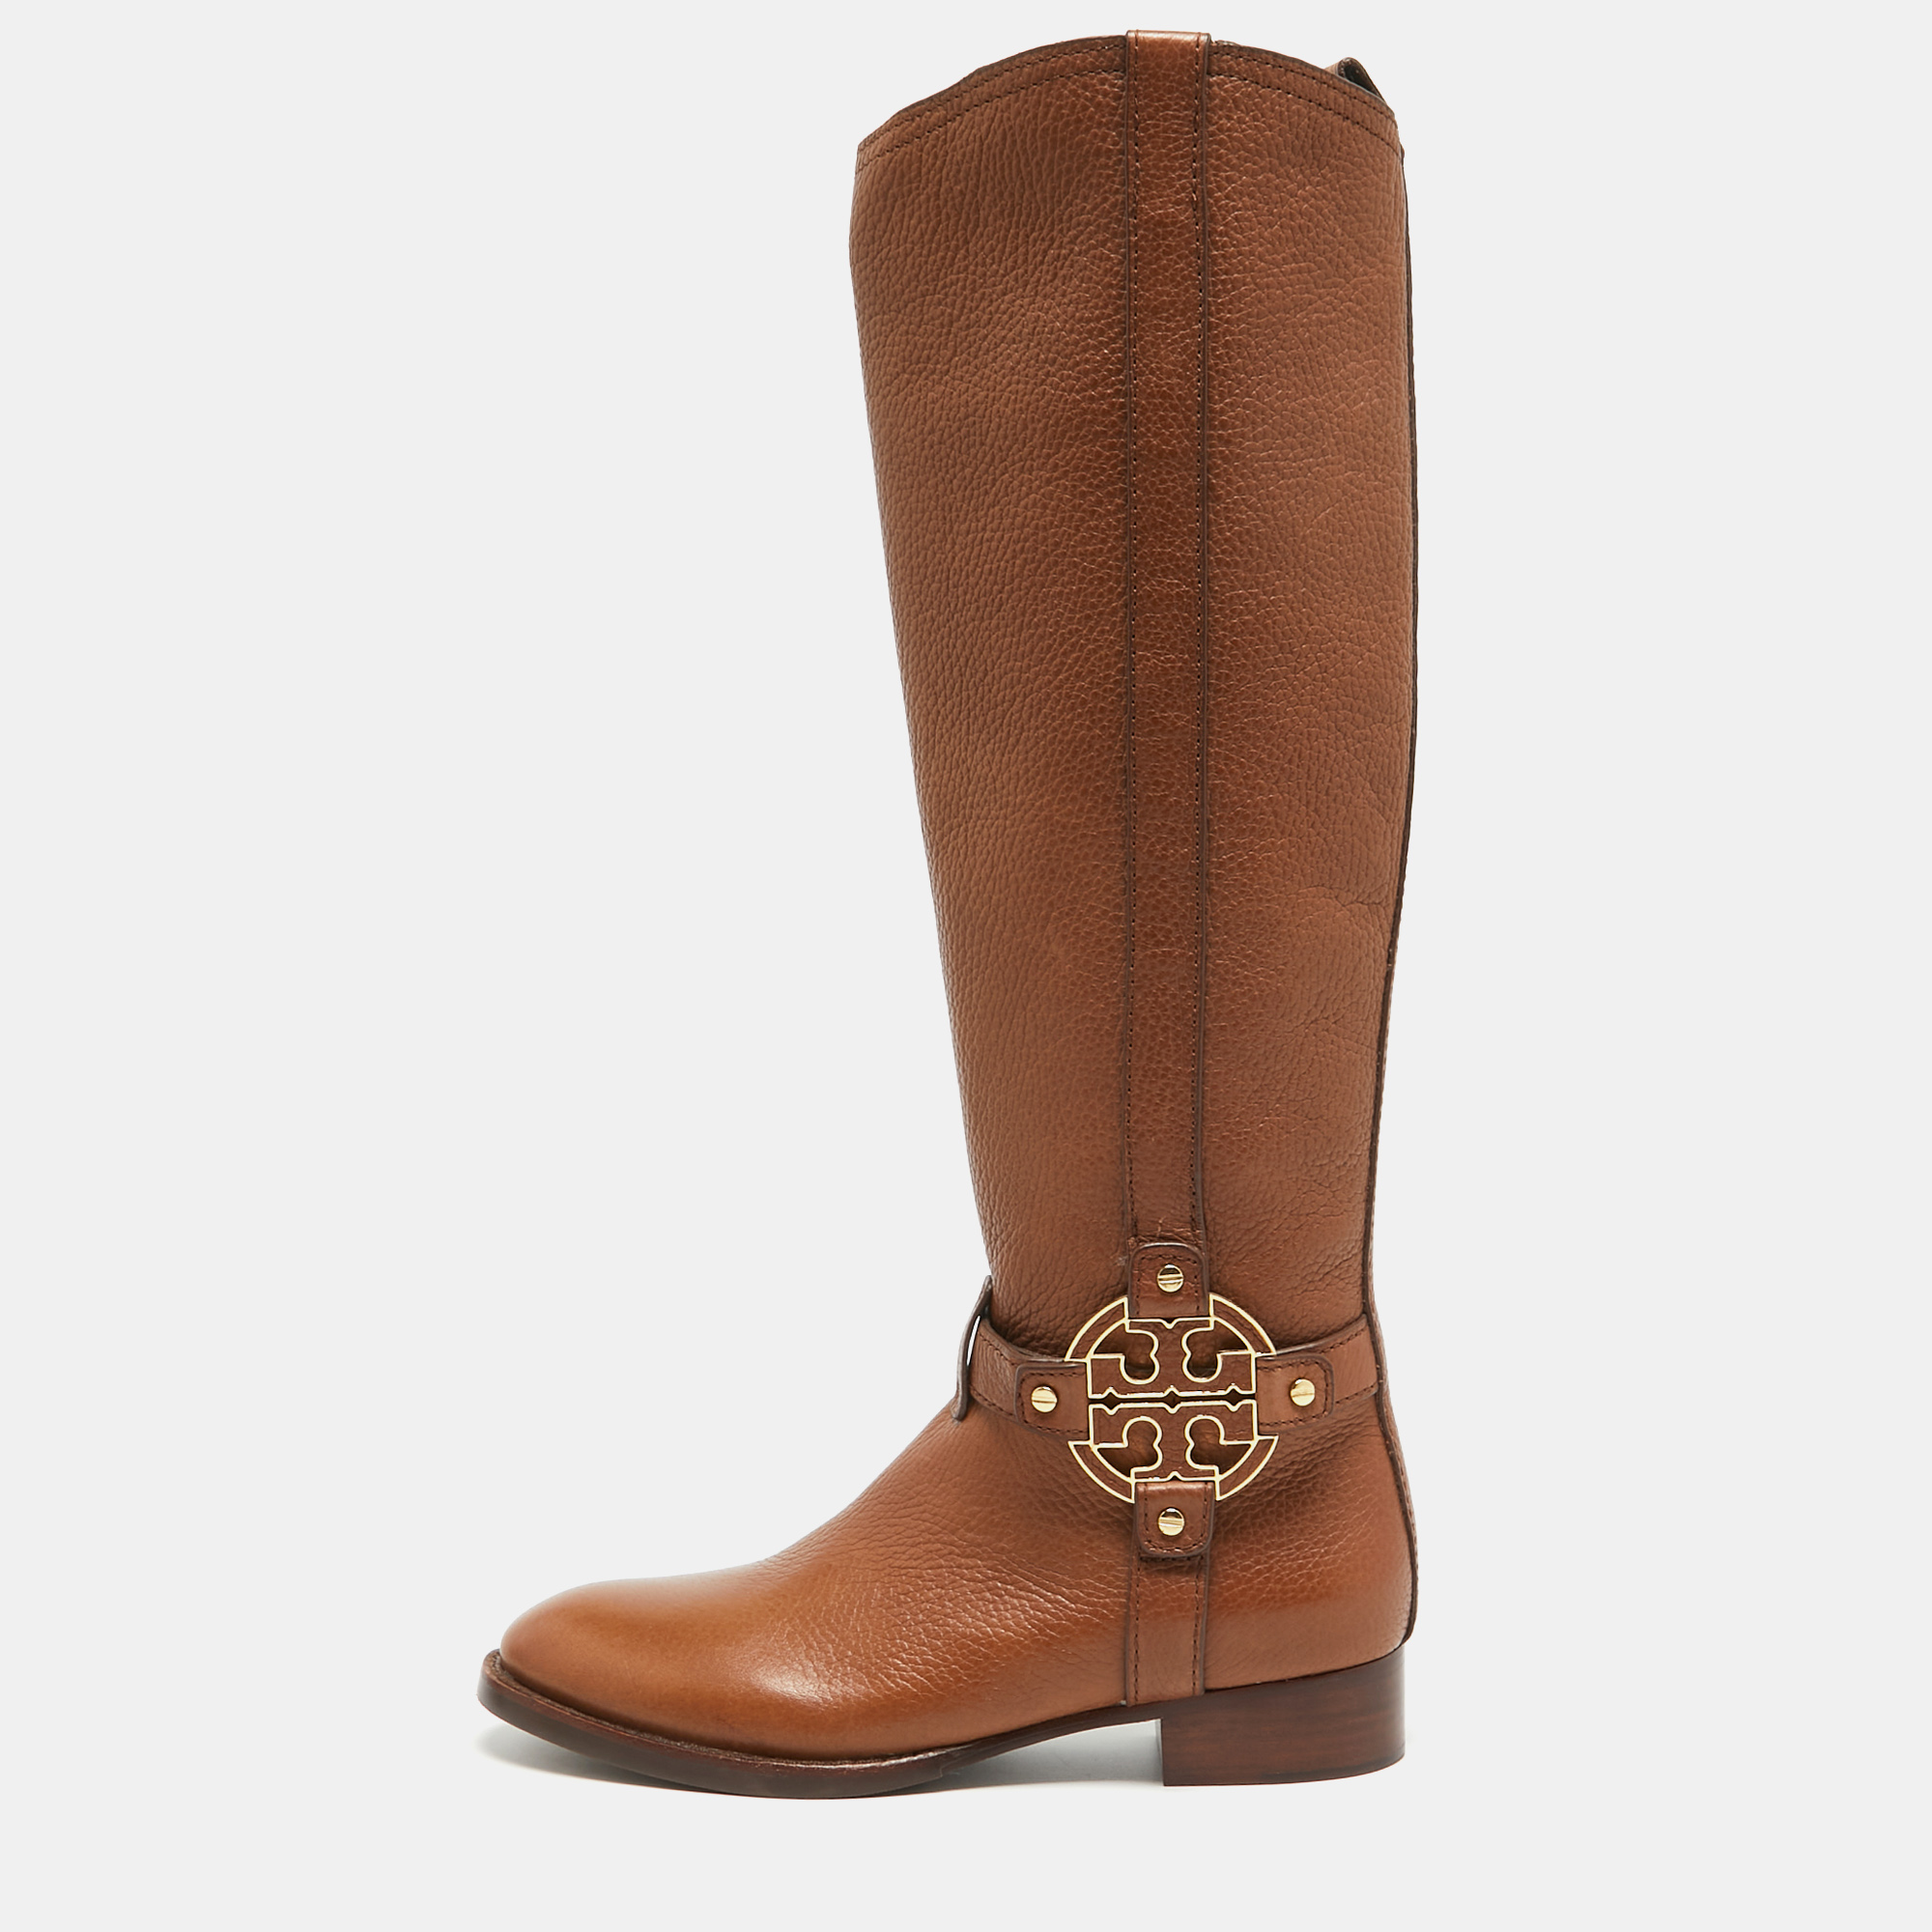 Tory burch brown leather knee length boots size 36.5